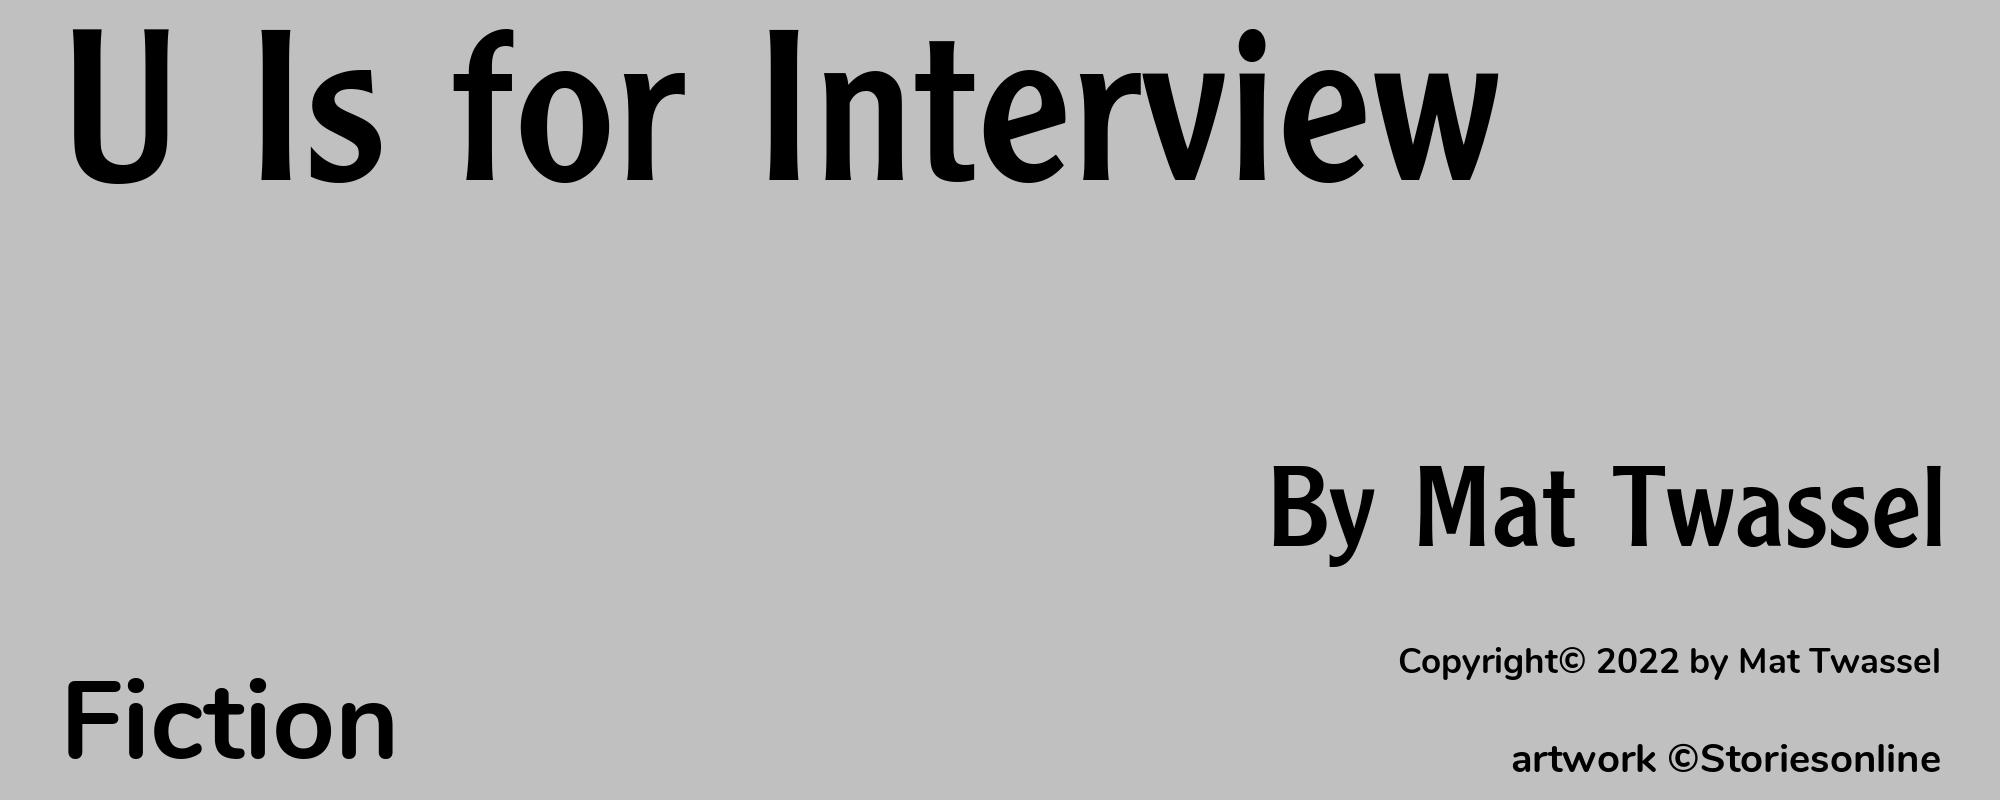 U Is for Interview - Cover